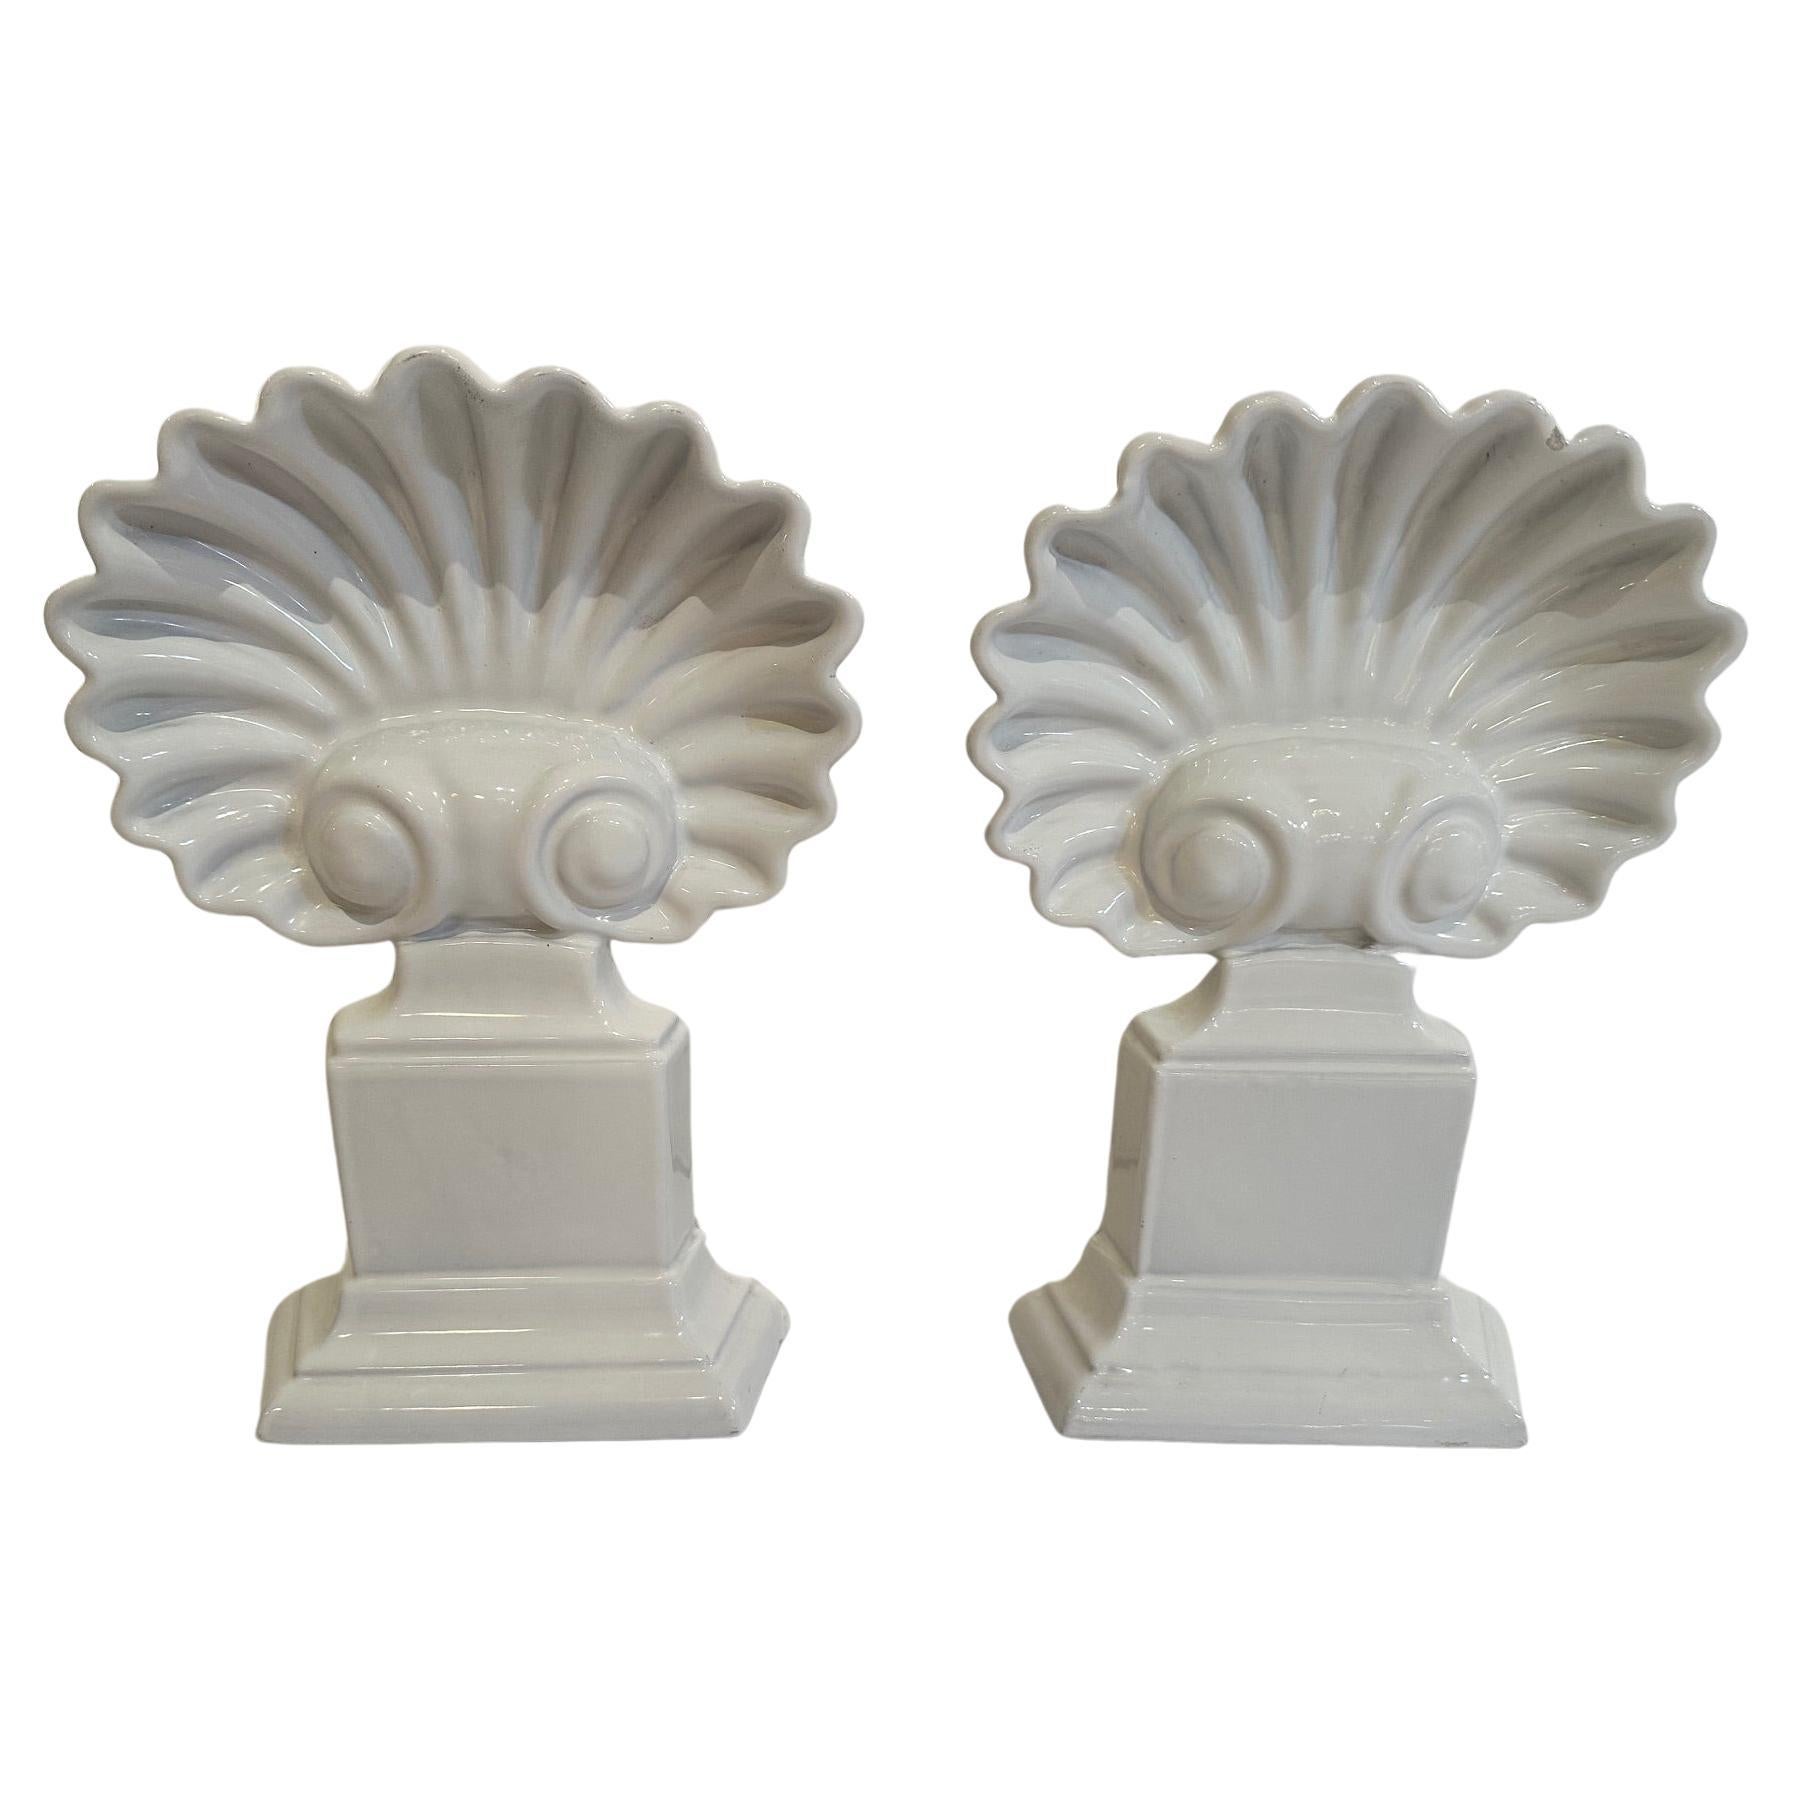 Impressive Pair of Cast Iron Enameled Shell Motif Sculptures For Sale